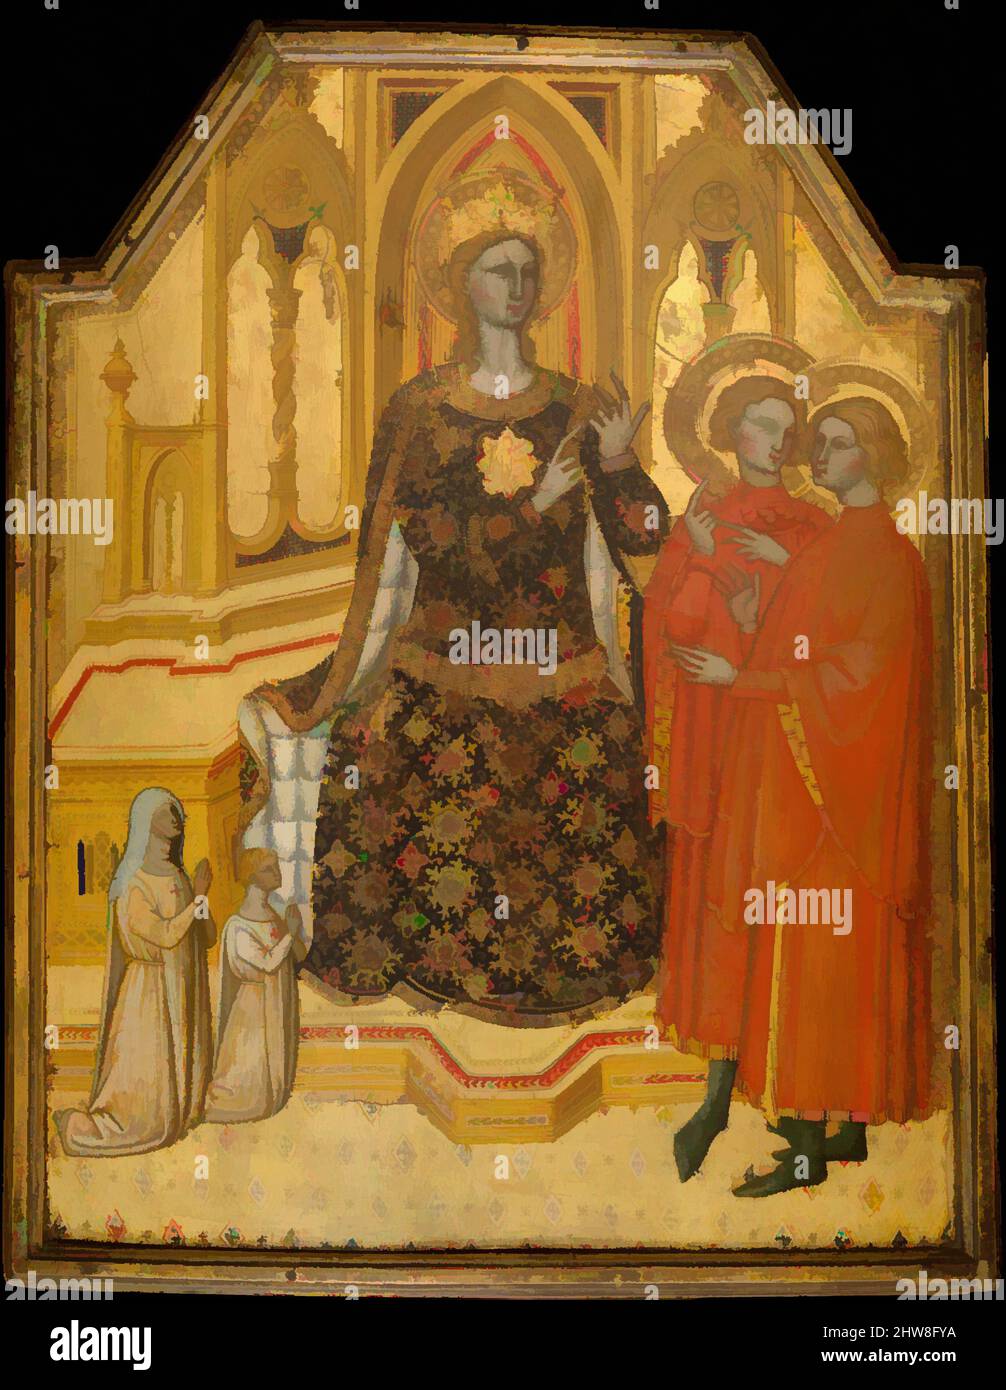 Art inspired by Saint Catherine Disputing and Two Donors, possibly ca. 1380, Tempera on wood, gold ground, Overall, with engaged frame, 22 3/4 x 18 1/4 in. (57.8 x 46.4 cm); painted surface 21 1/4 x 16 3/4 in. (54 x 42.5 cm), Paintings, Cenni di Francesco di Ser Cenni (Italian, Classic works modernized by Artotop with a splash of modernity. Shapes, color and value, eye-catching visual impact on art. Emotions through freedom of artworks in a contemporary way. A timeless message pursuing a wildly creative new direction. Artists turning to the digital medium and creating the Artotop NFT Stock Photo